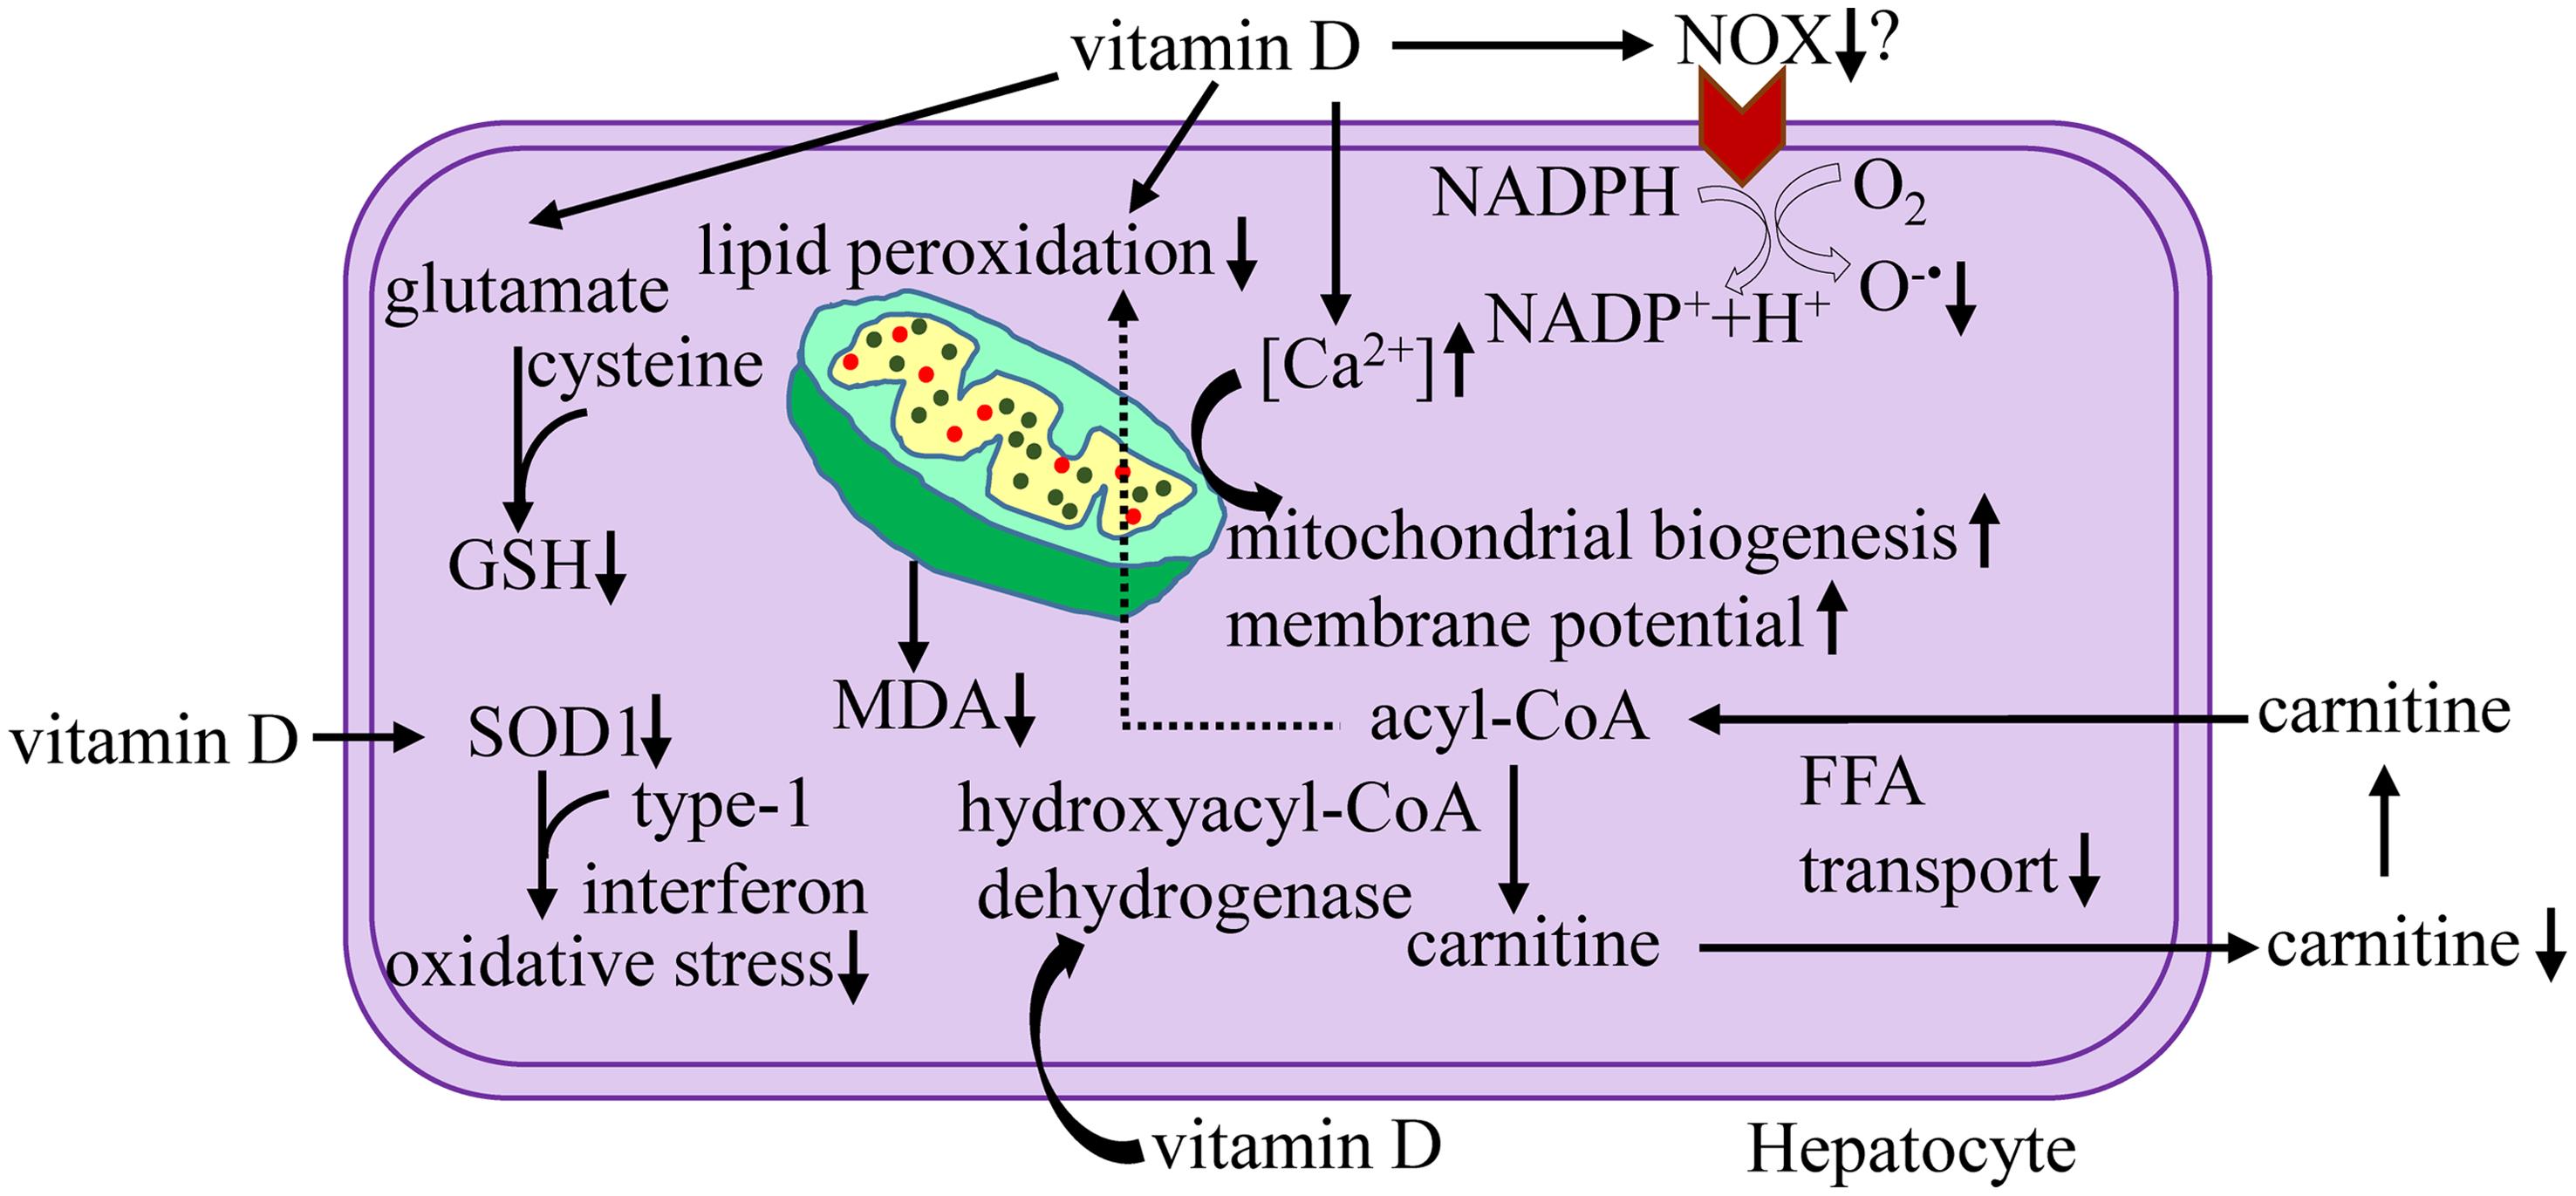 Molecular targets of vitamin D to control oxidative stress linked to liver injury and NAFLD.